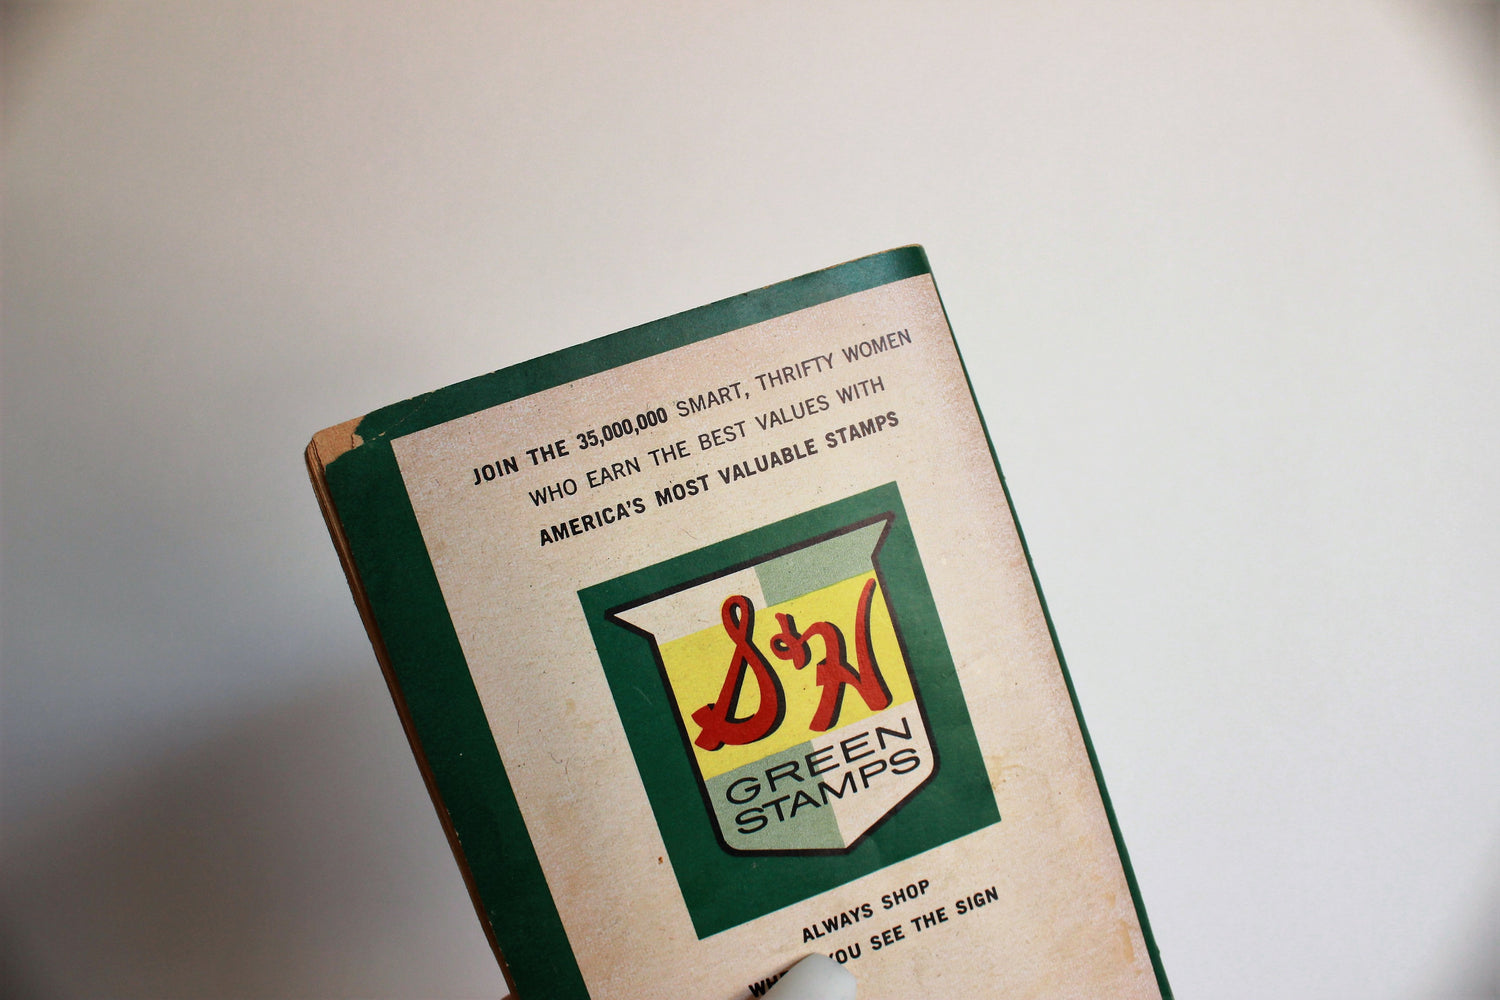 Vintage 1960s Green Stamps Books